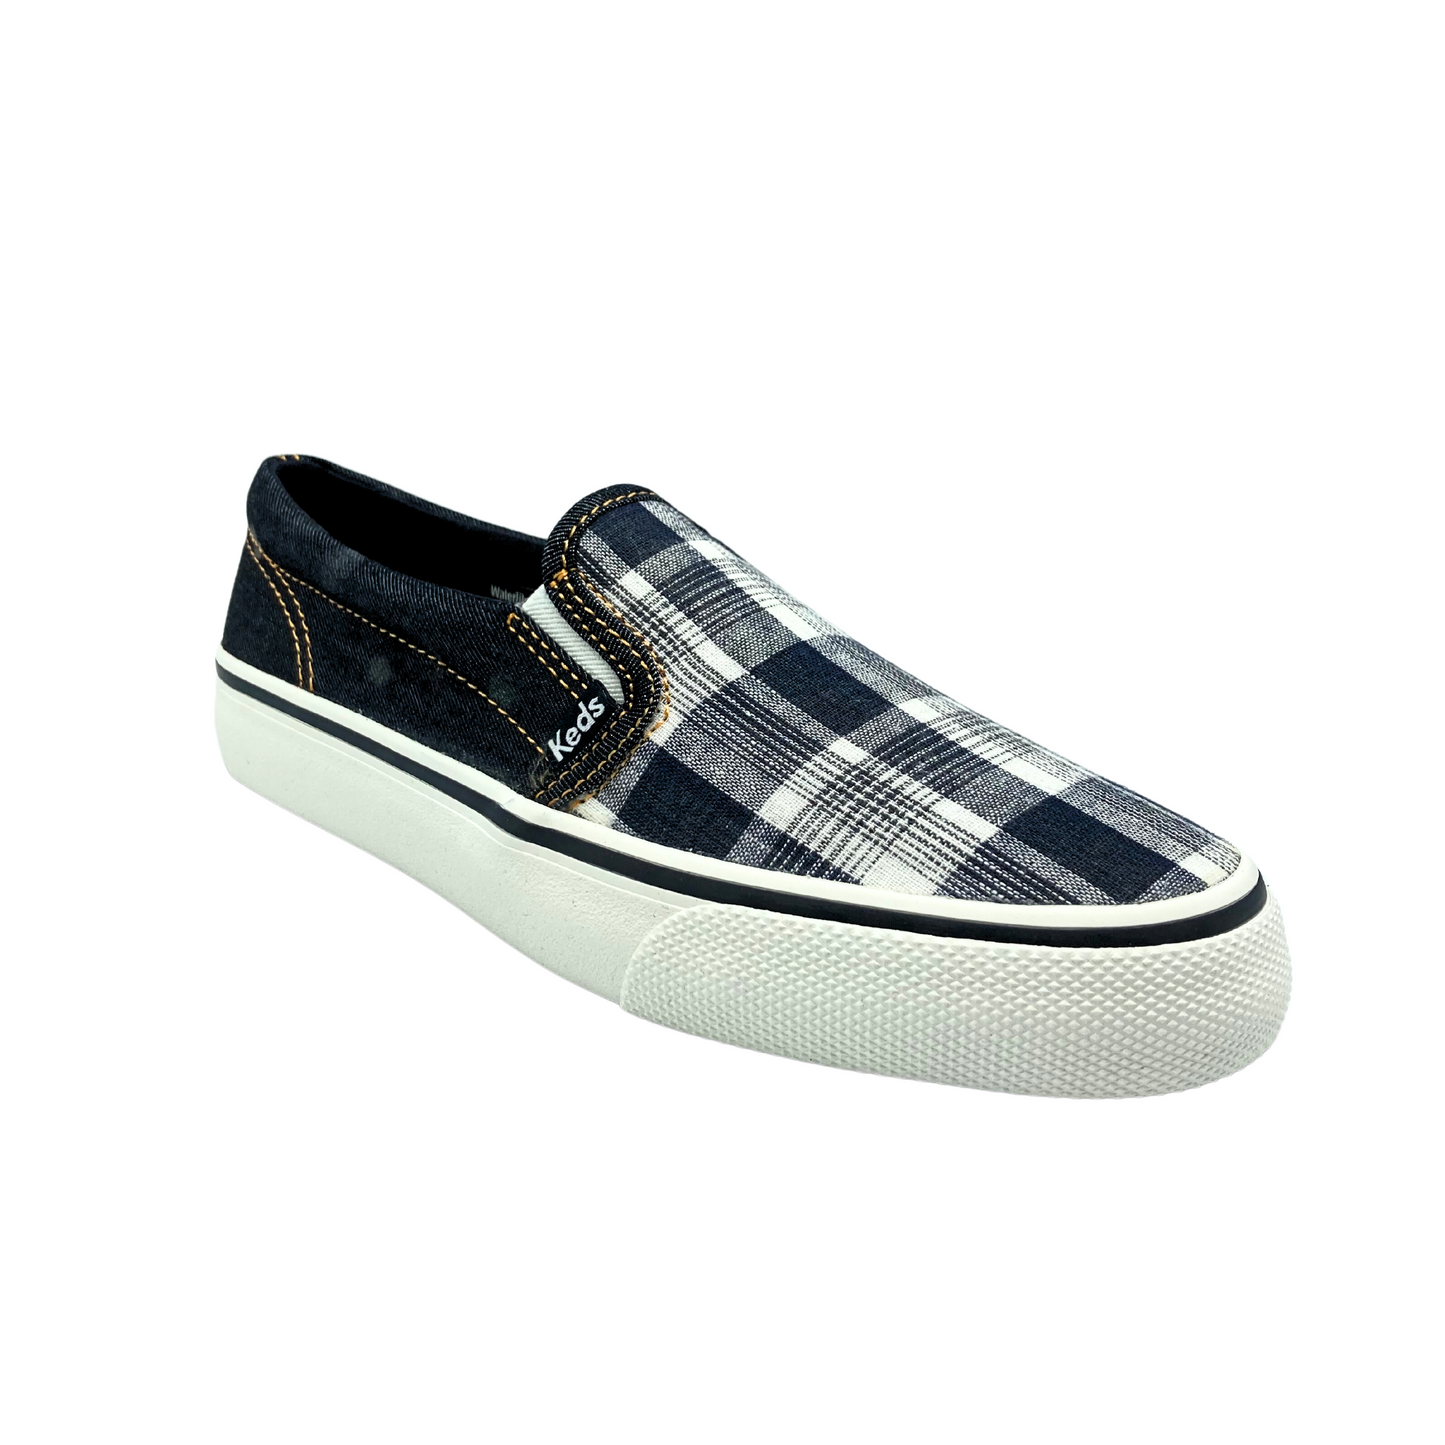 Angled front view of a slip on canvas sneaker in a black denim plaid.  Rubber outsole is white with a black stripe around the top